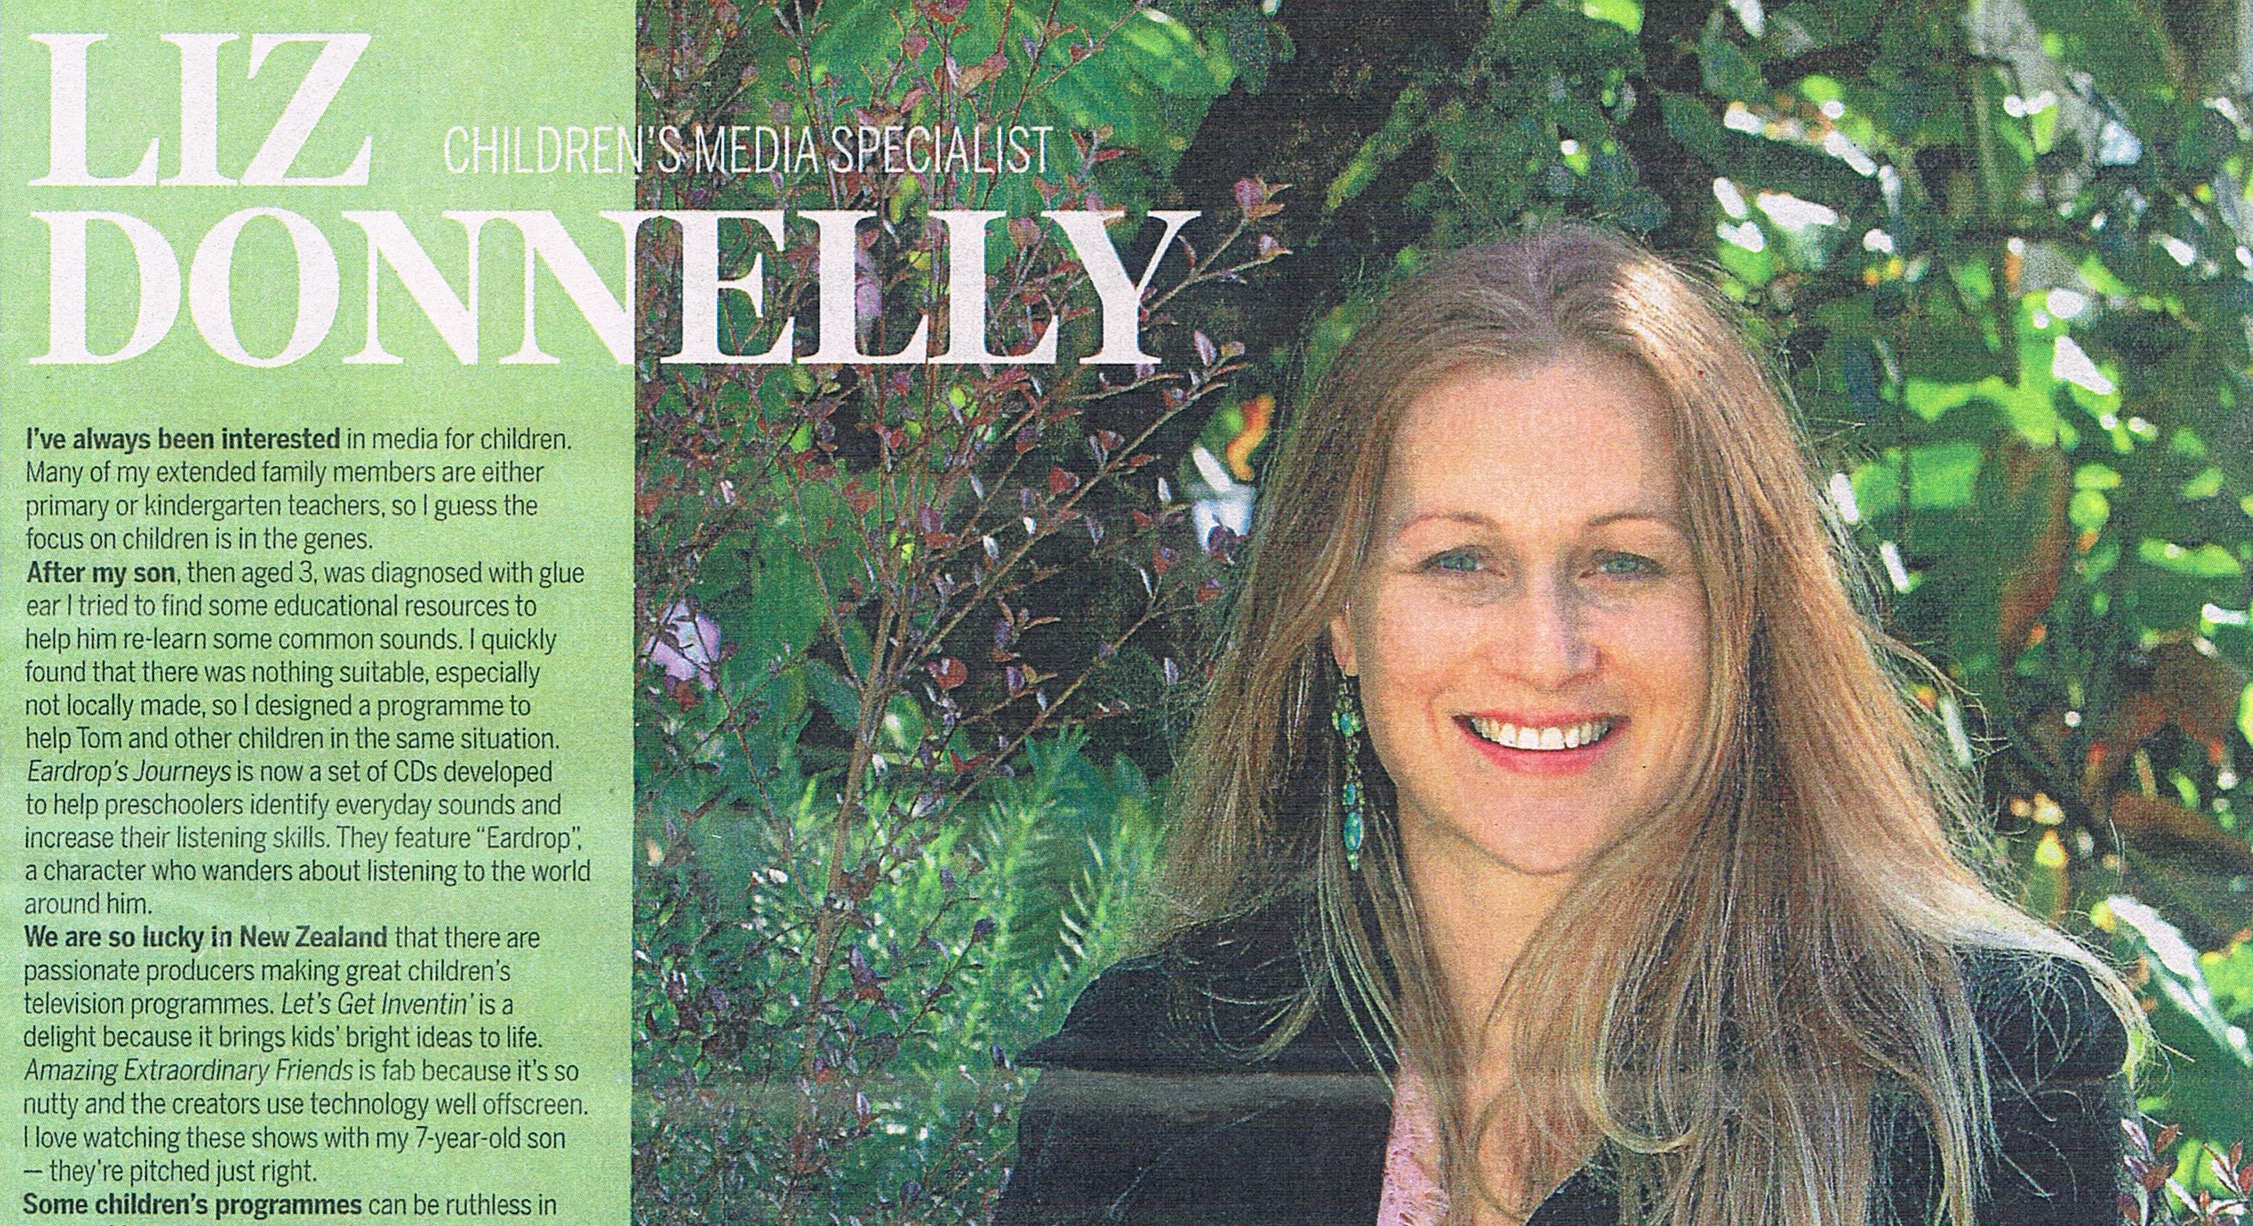 Liz Donnelly profile article in NZ Herald